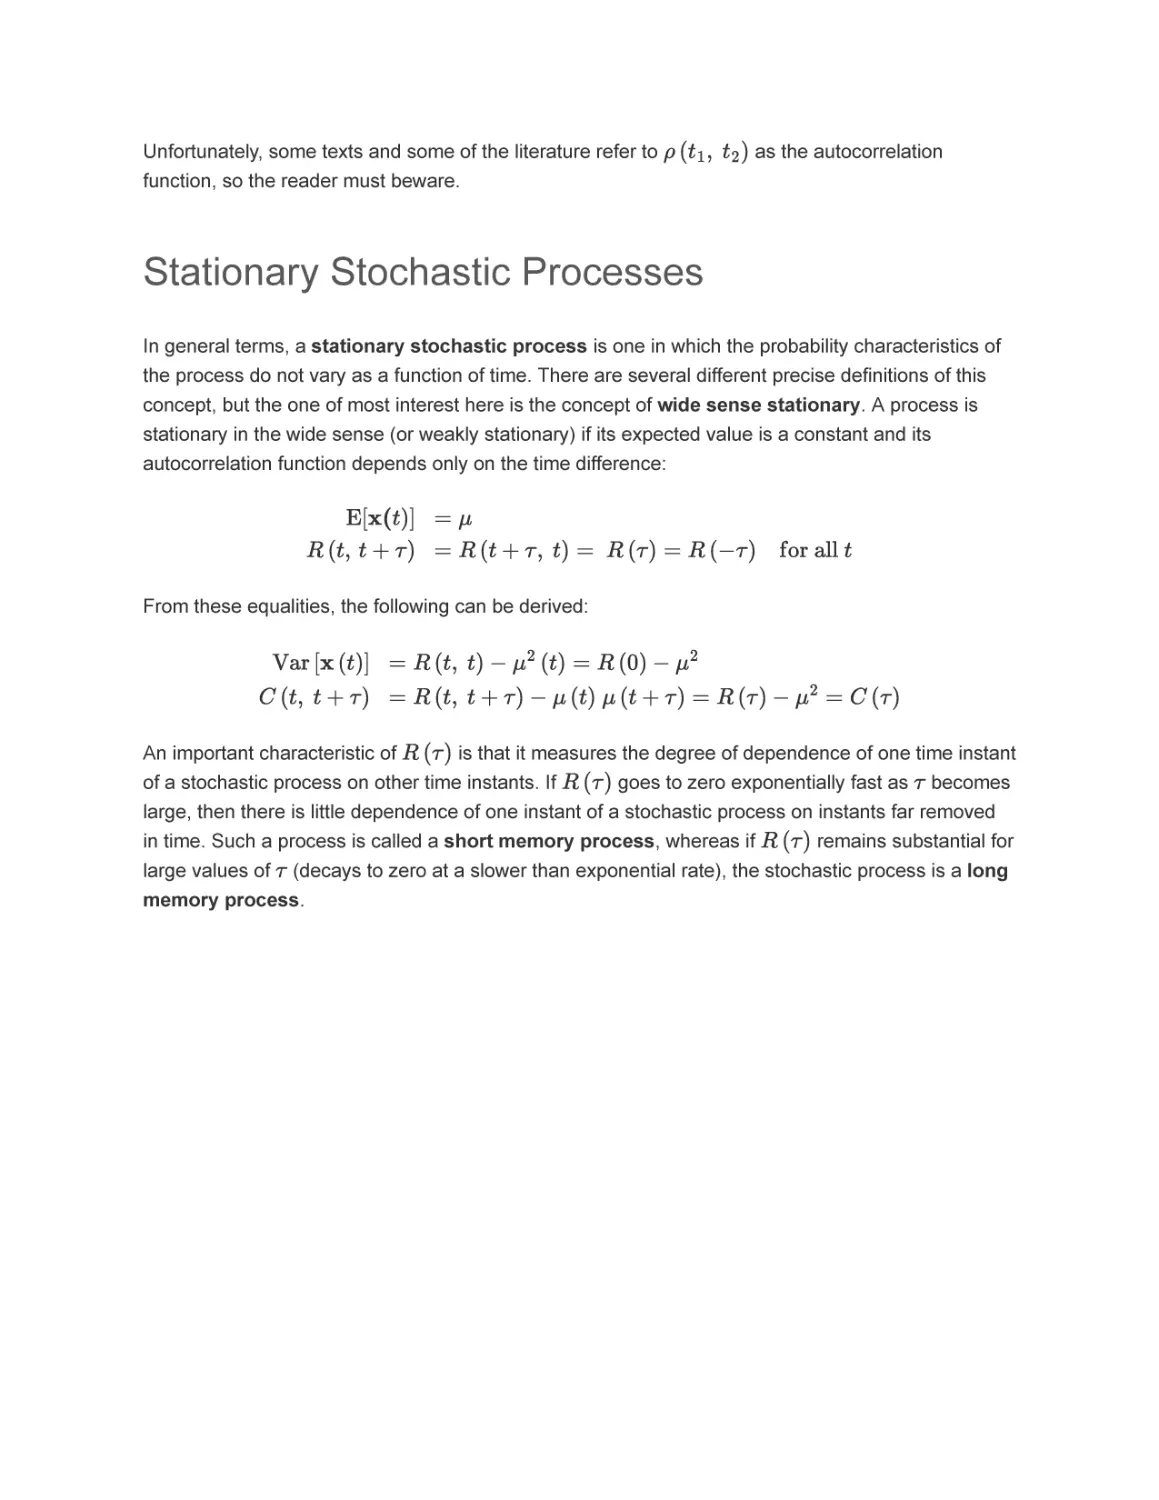 Stationary Stochastic Processes